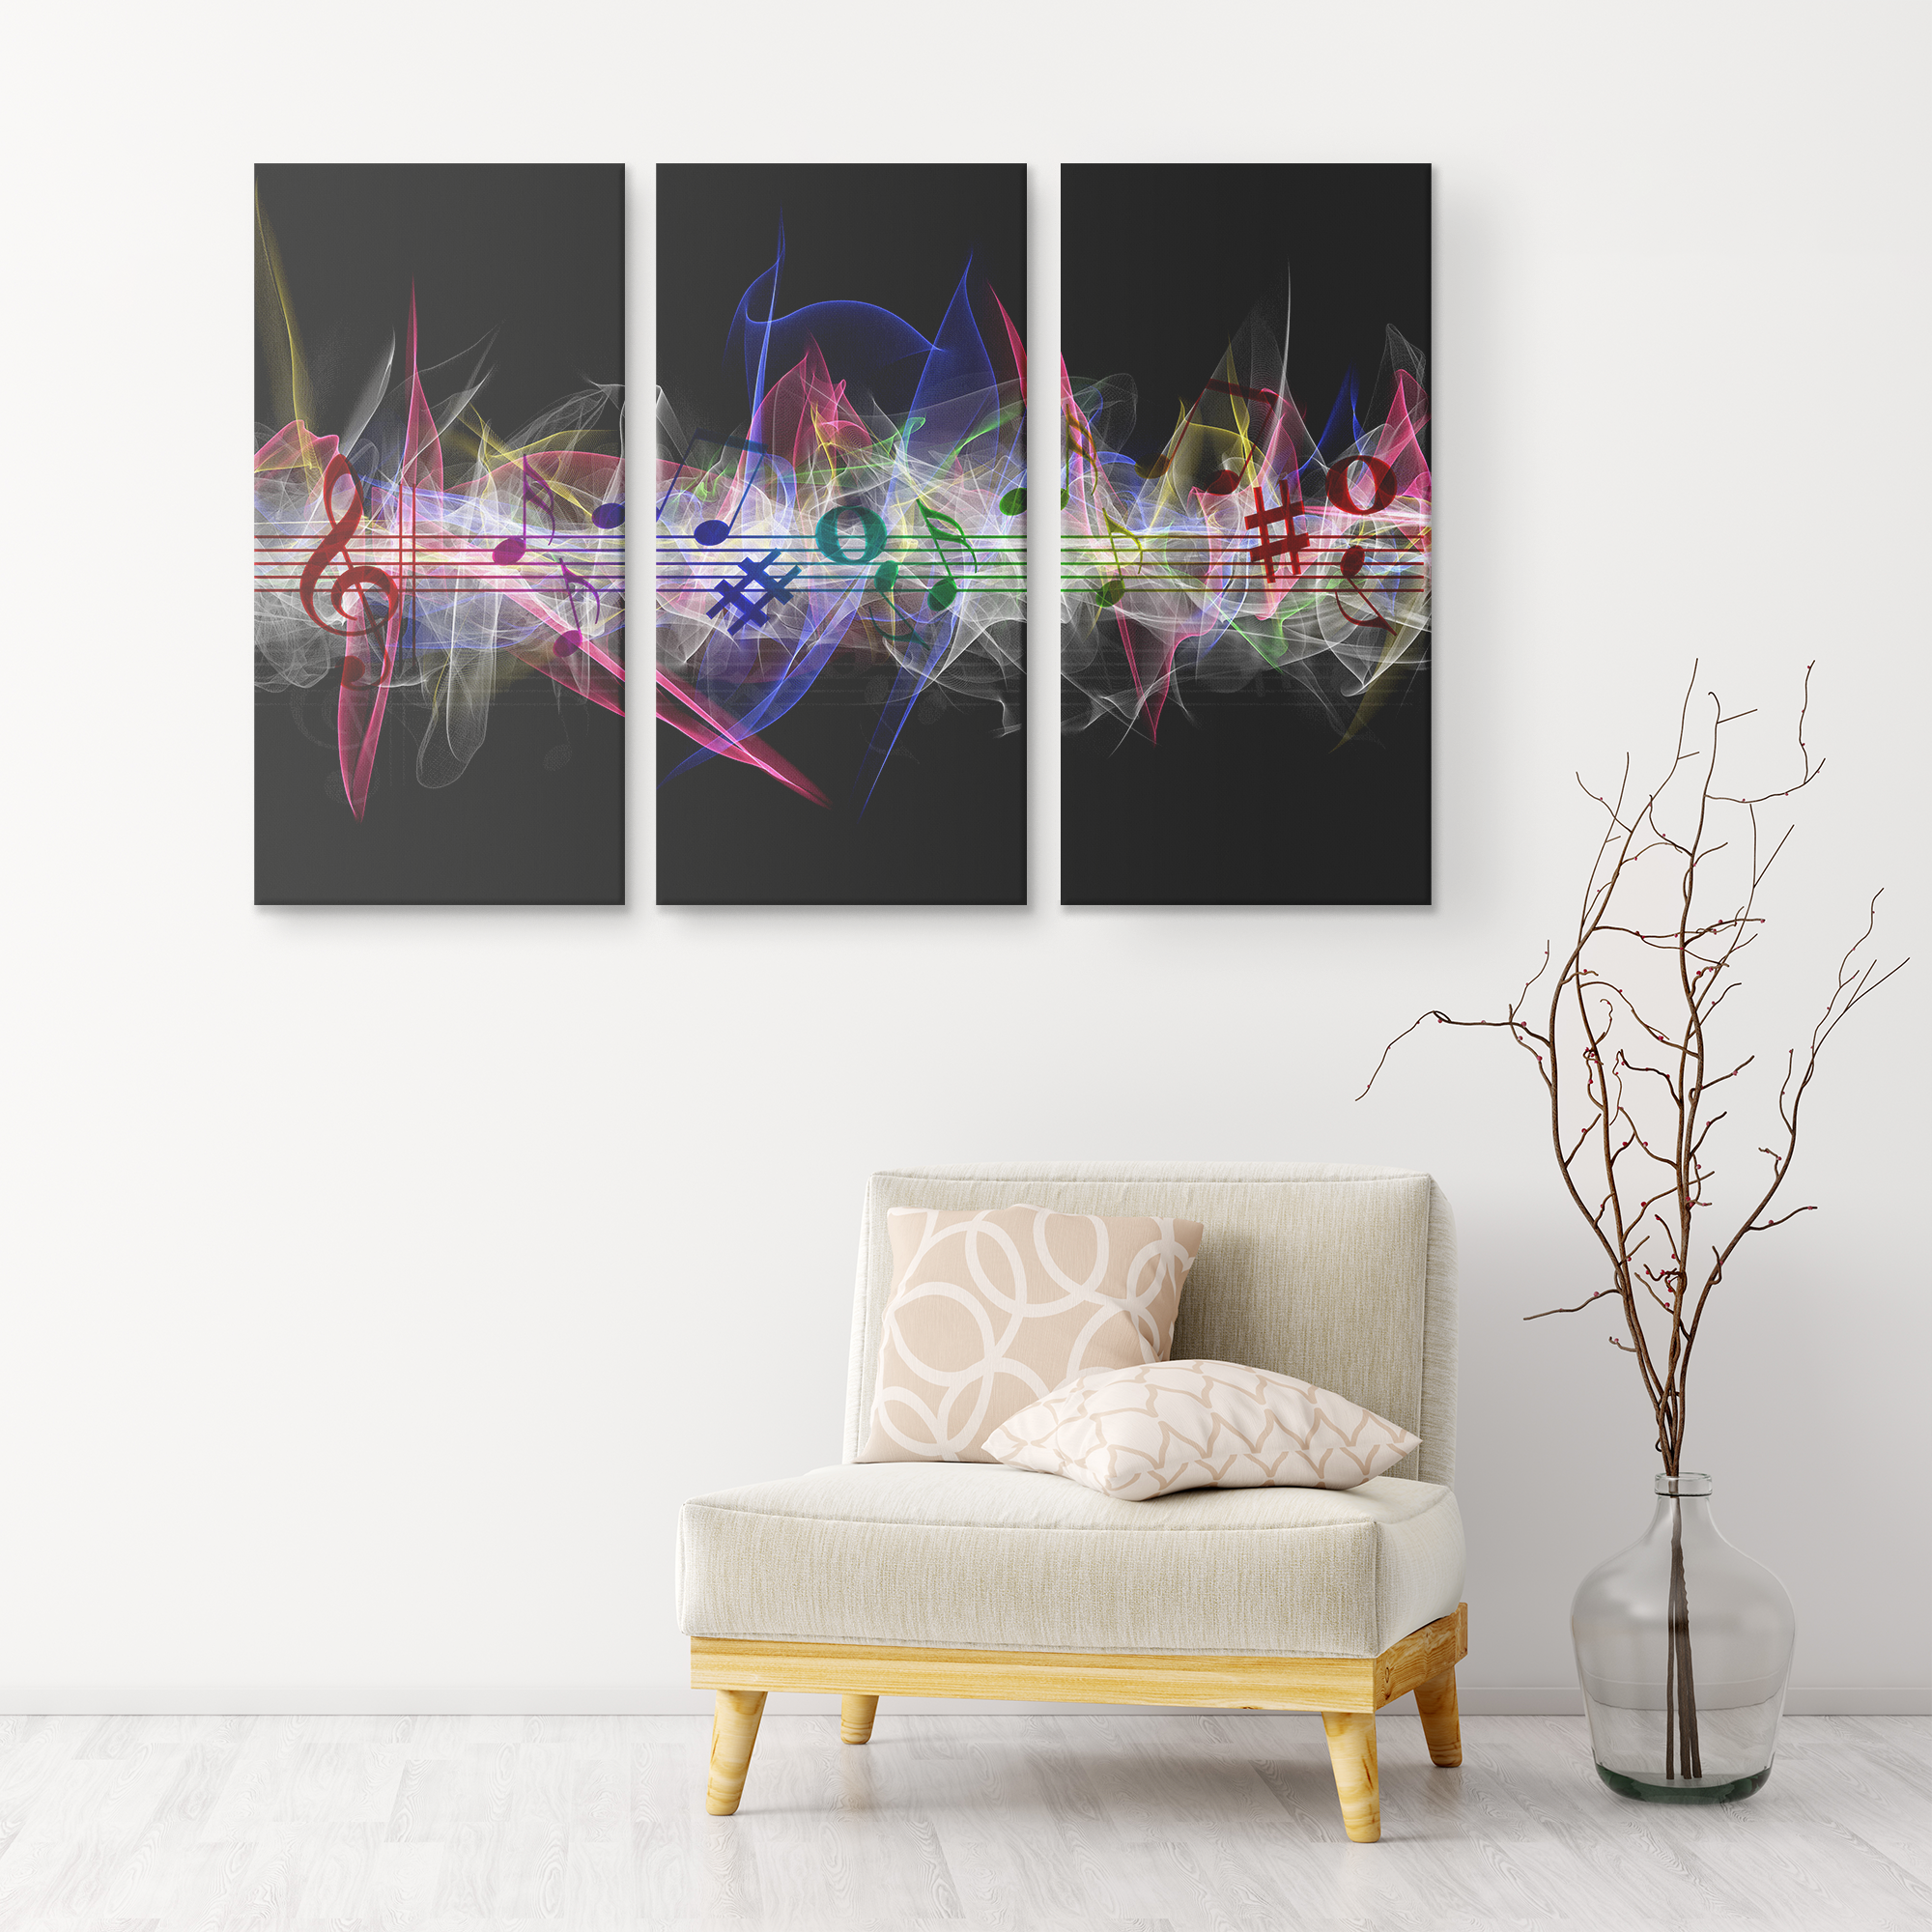 The vibration of music notes - 3 Piece Canvas gallery art